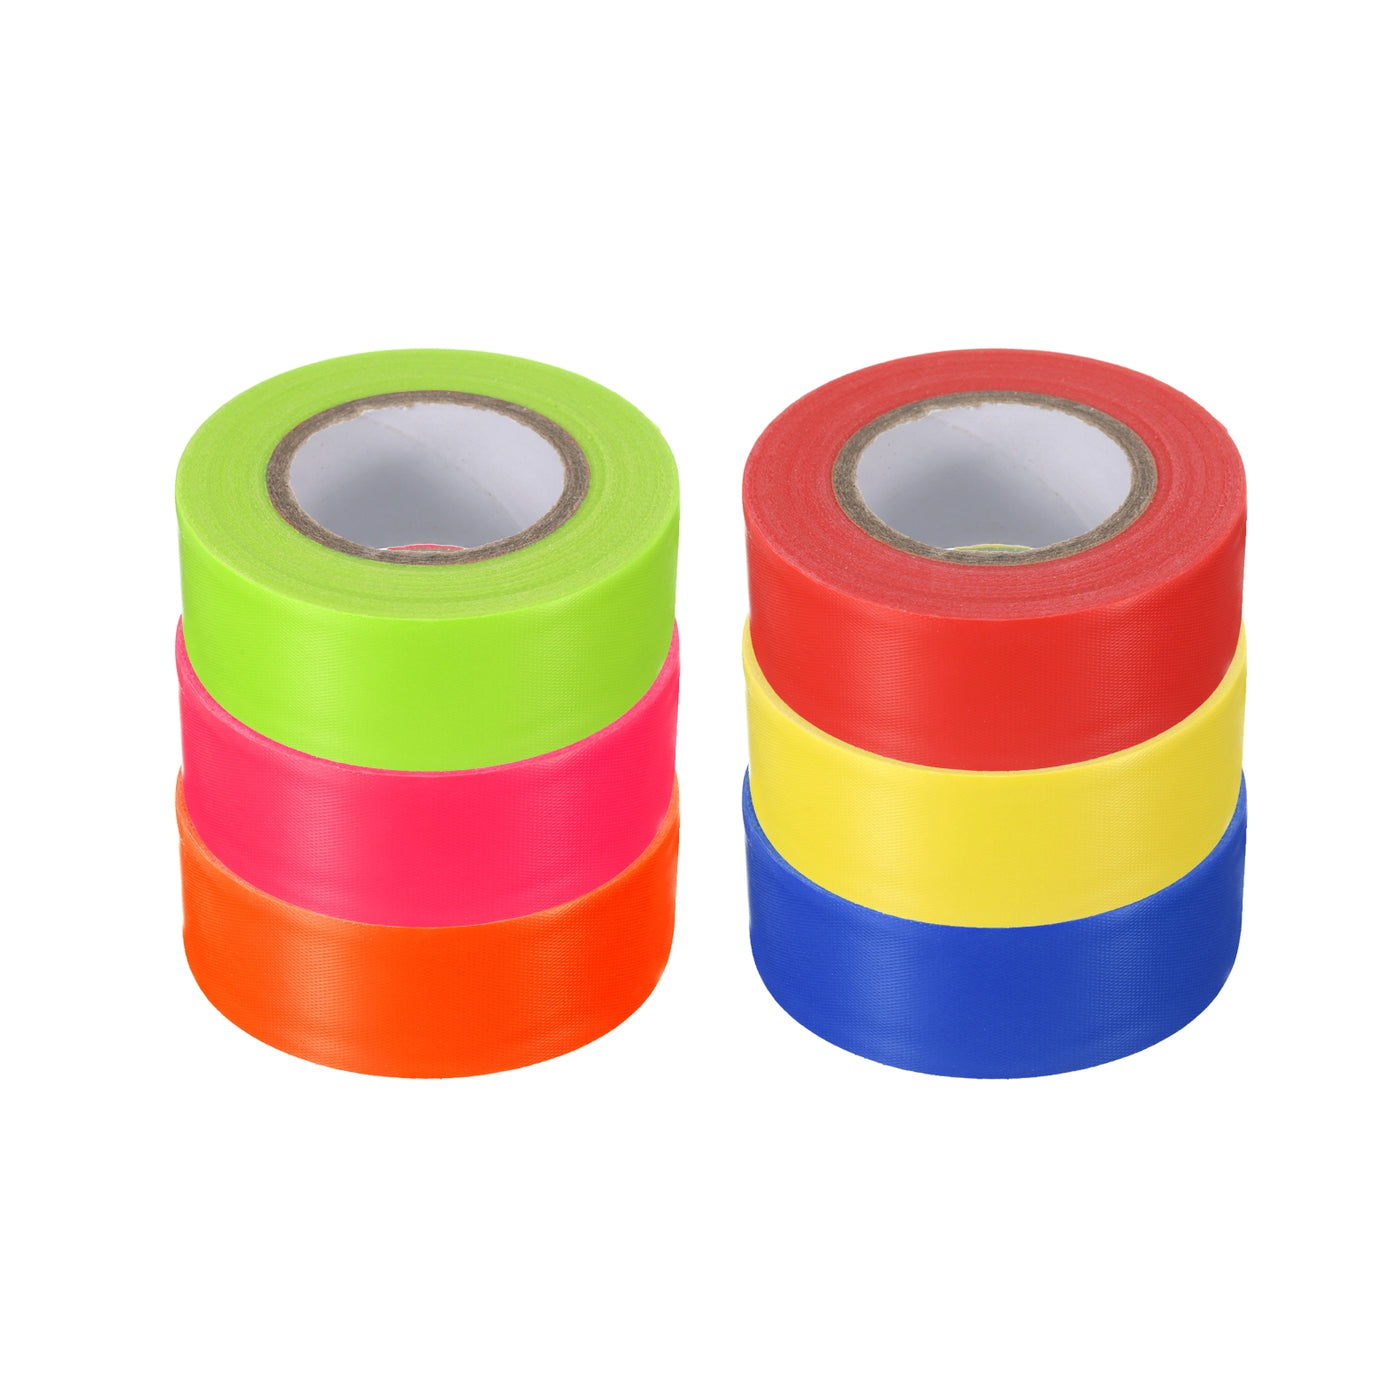 uxcell Uxcell PVC Flagging Tape 25mm x 30m/98.4ft Marking Tape Non-Adhesive 6pcs